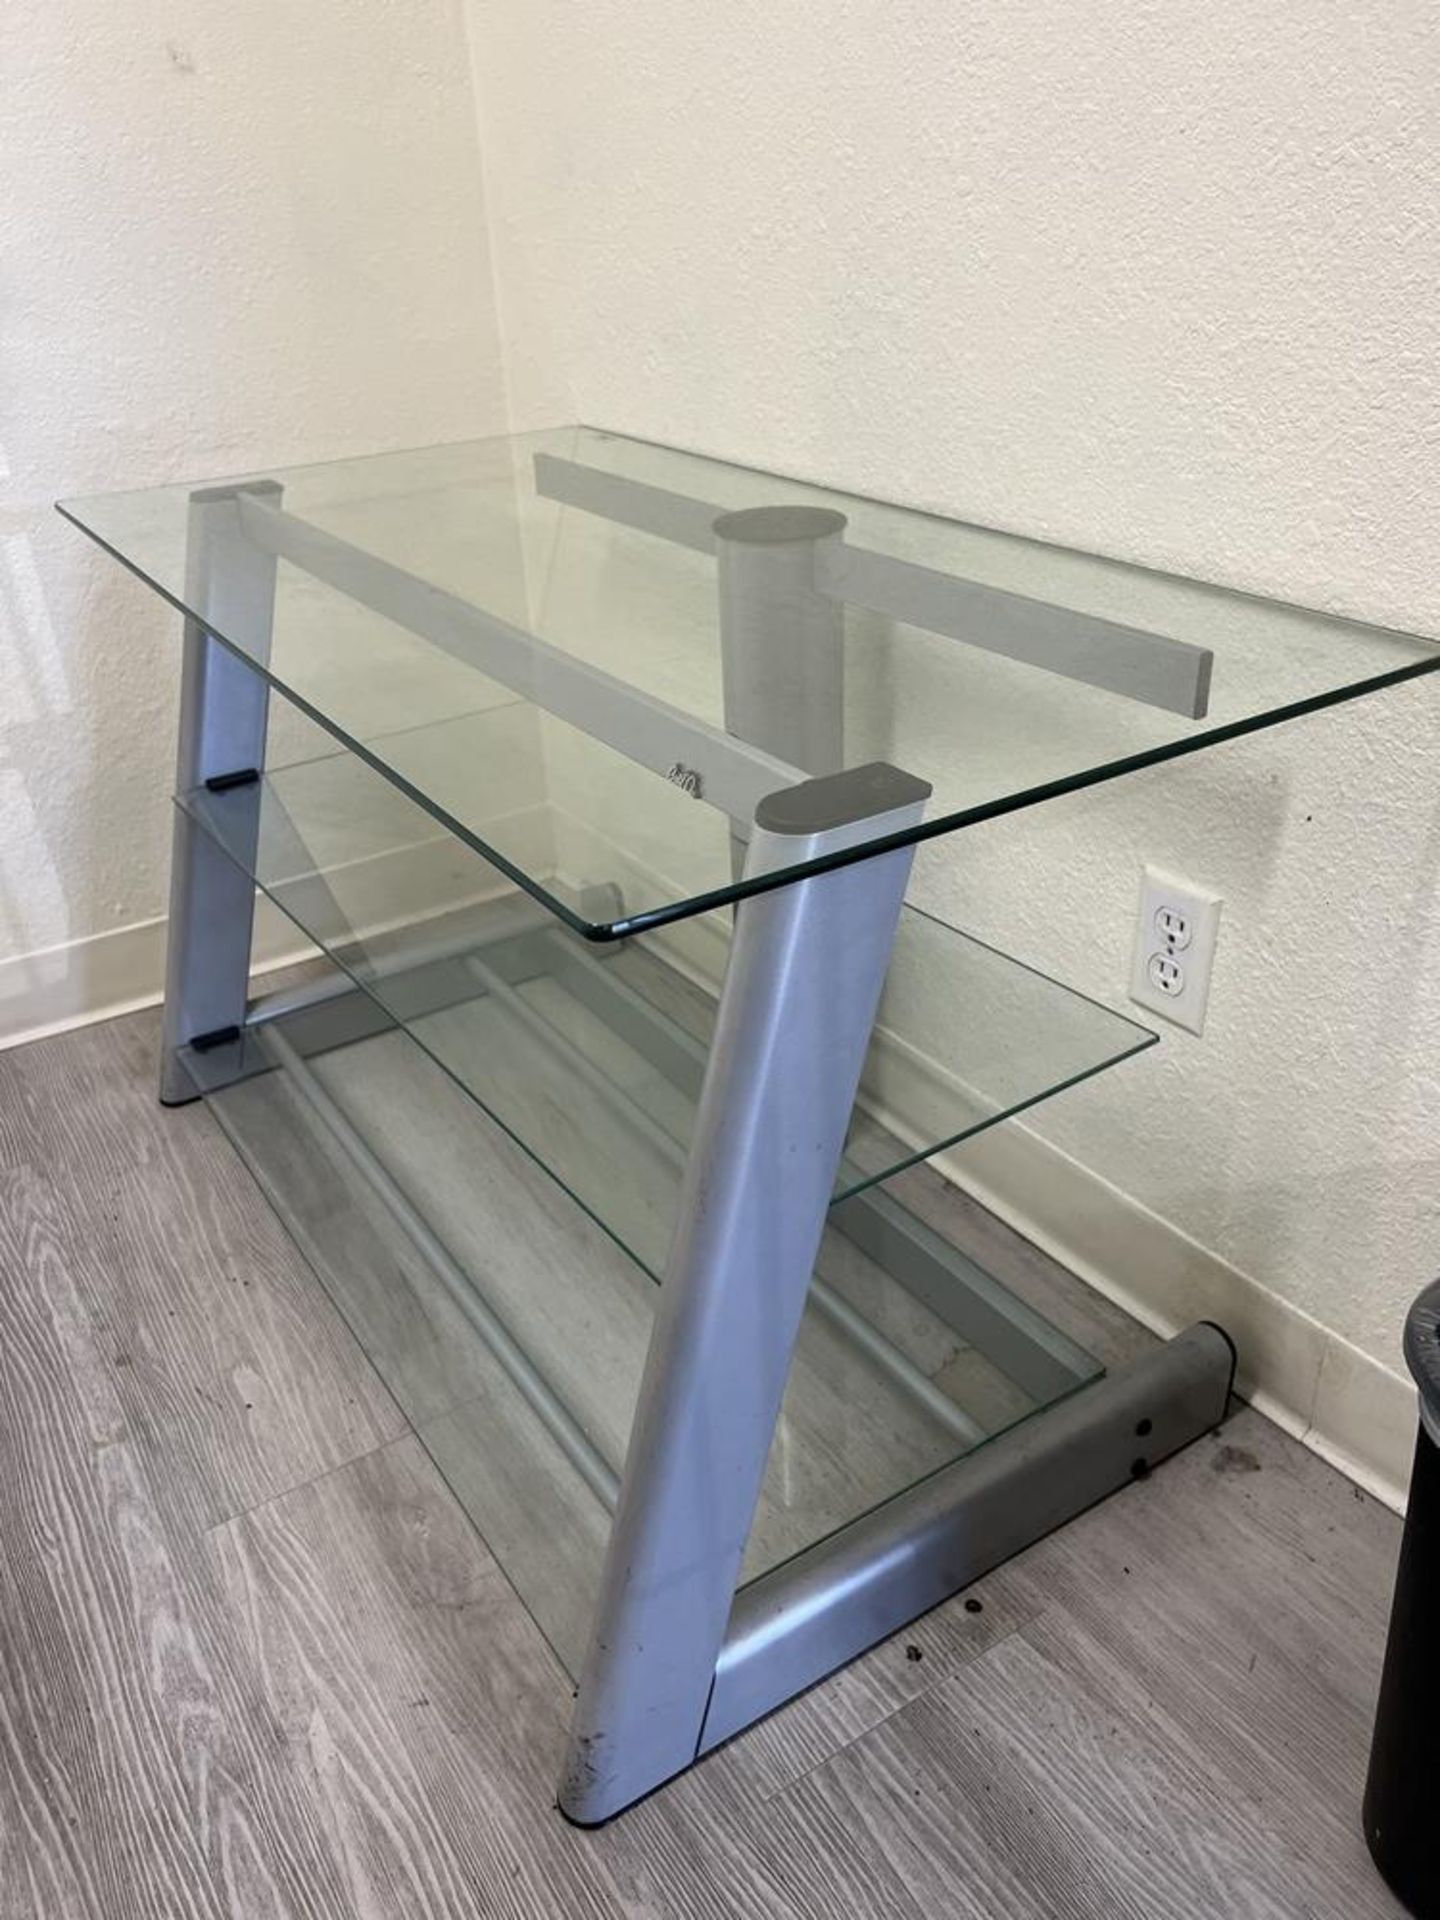 3 Tier Glass Entertainment Center 41" x 21" x 24" - Image 2 of 3